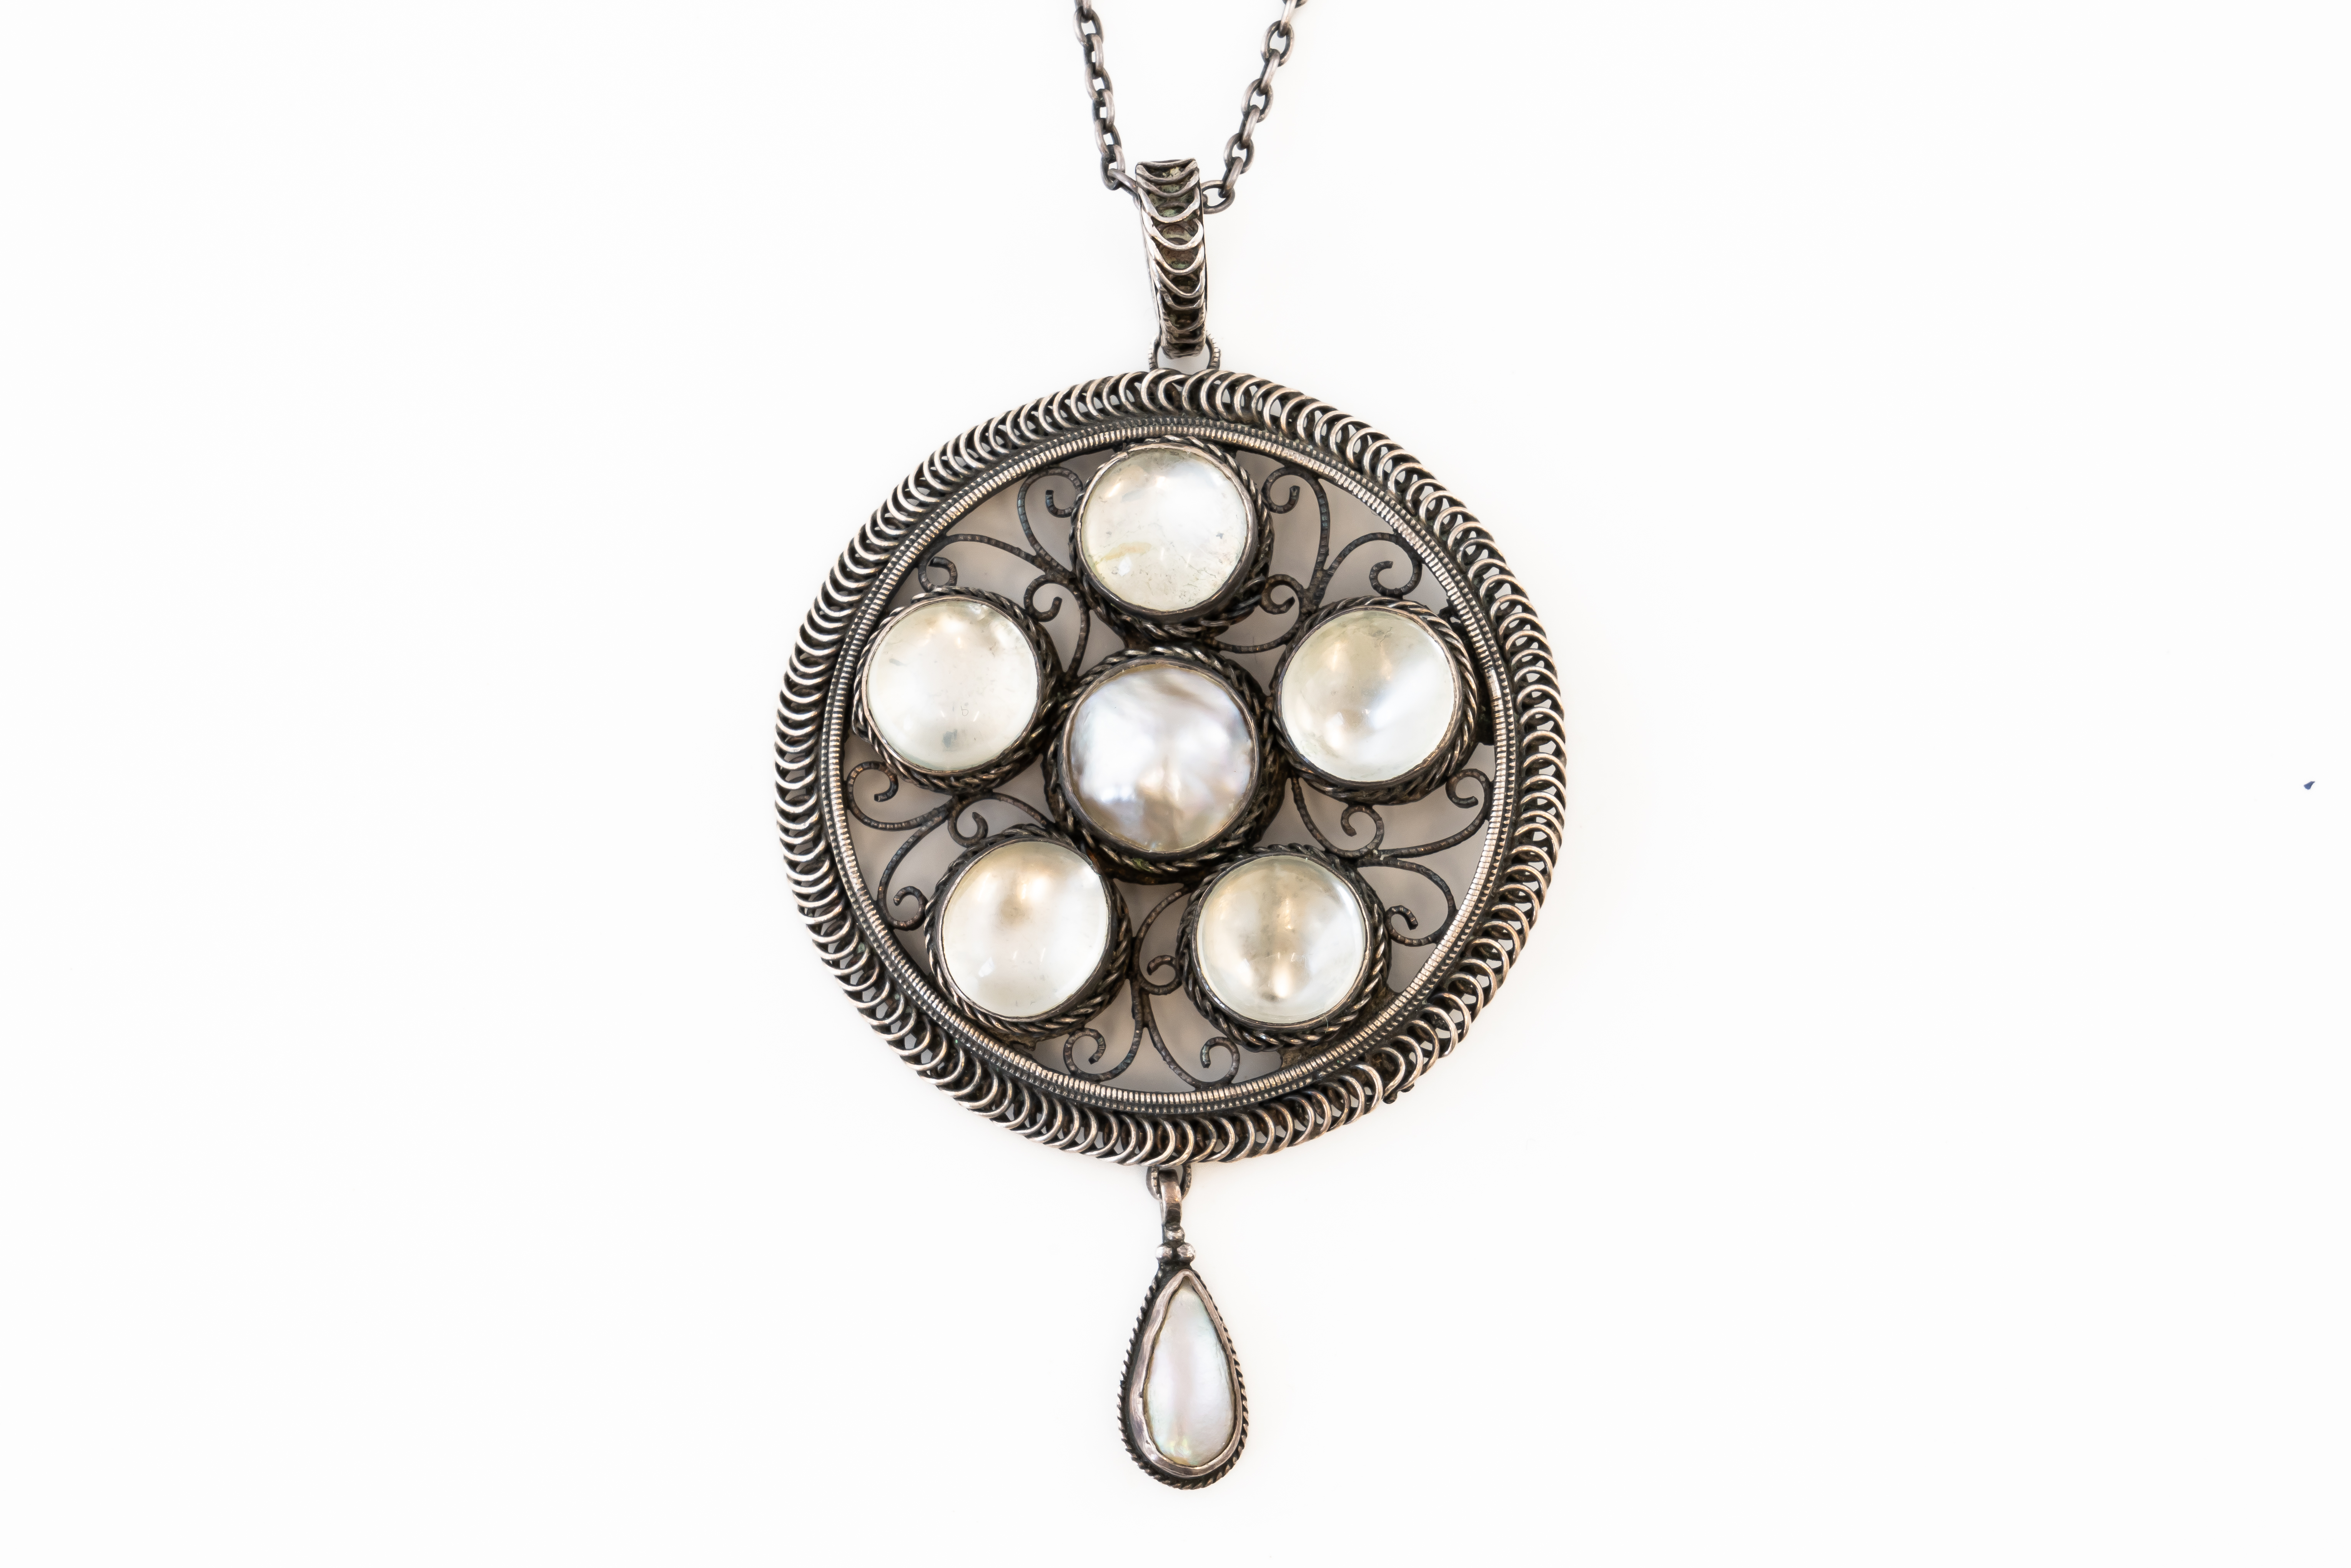 ARTHUR AND GEORGIE GASKIN - A MOONSTONE AND PEARL NECKLACE